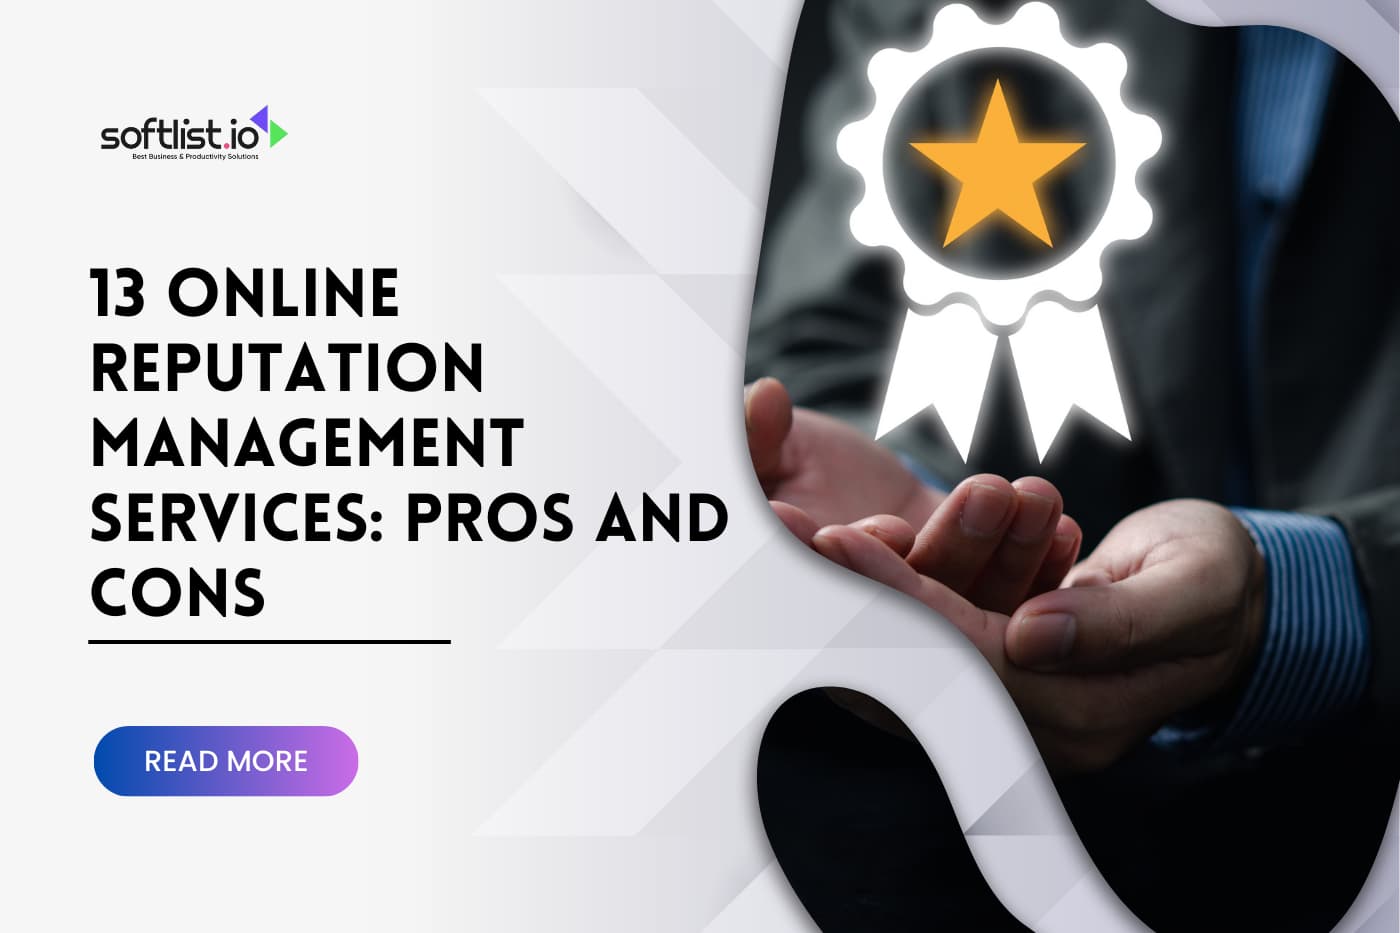 13 Online Reputation Management Services Pros and Cons